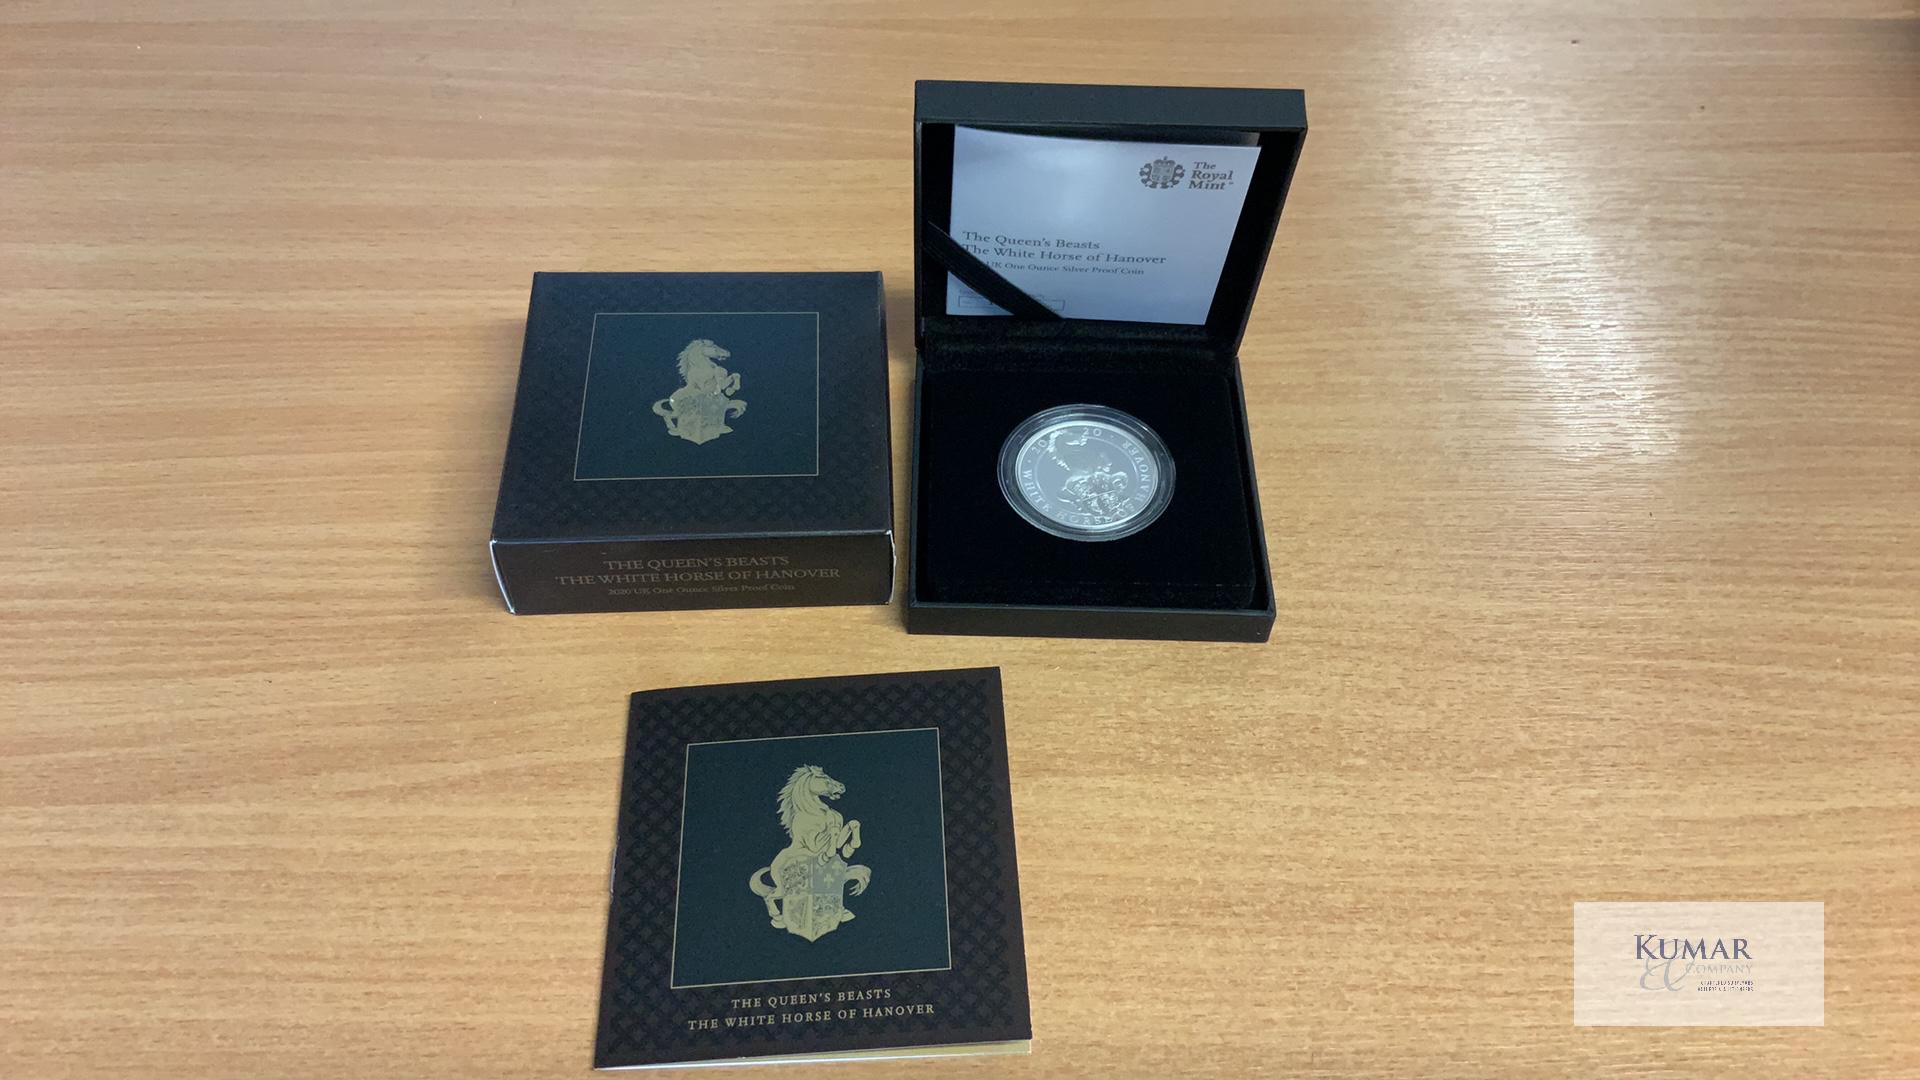 The Royal Mint Collection- The Queens Beasts. The White Horse of Hanover 2020 UK One Ounce Silver - Image 2 of 4